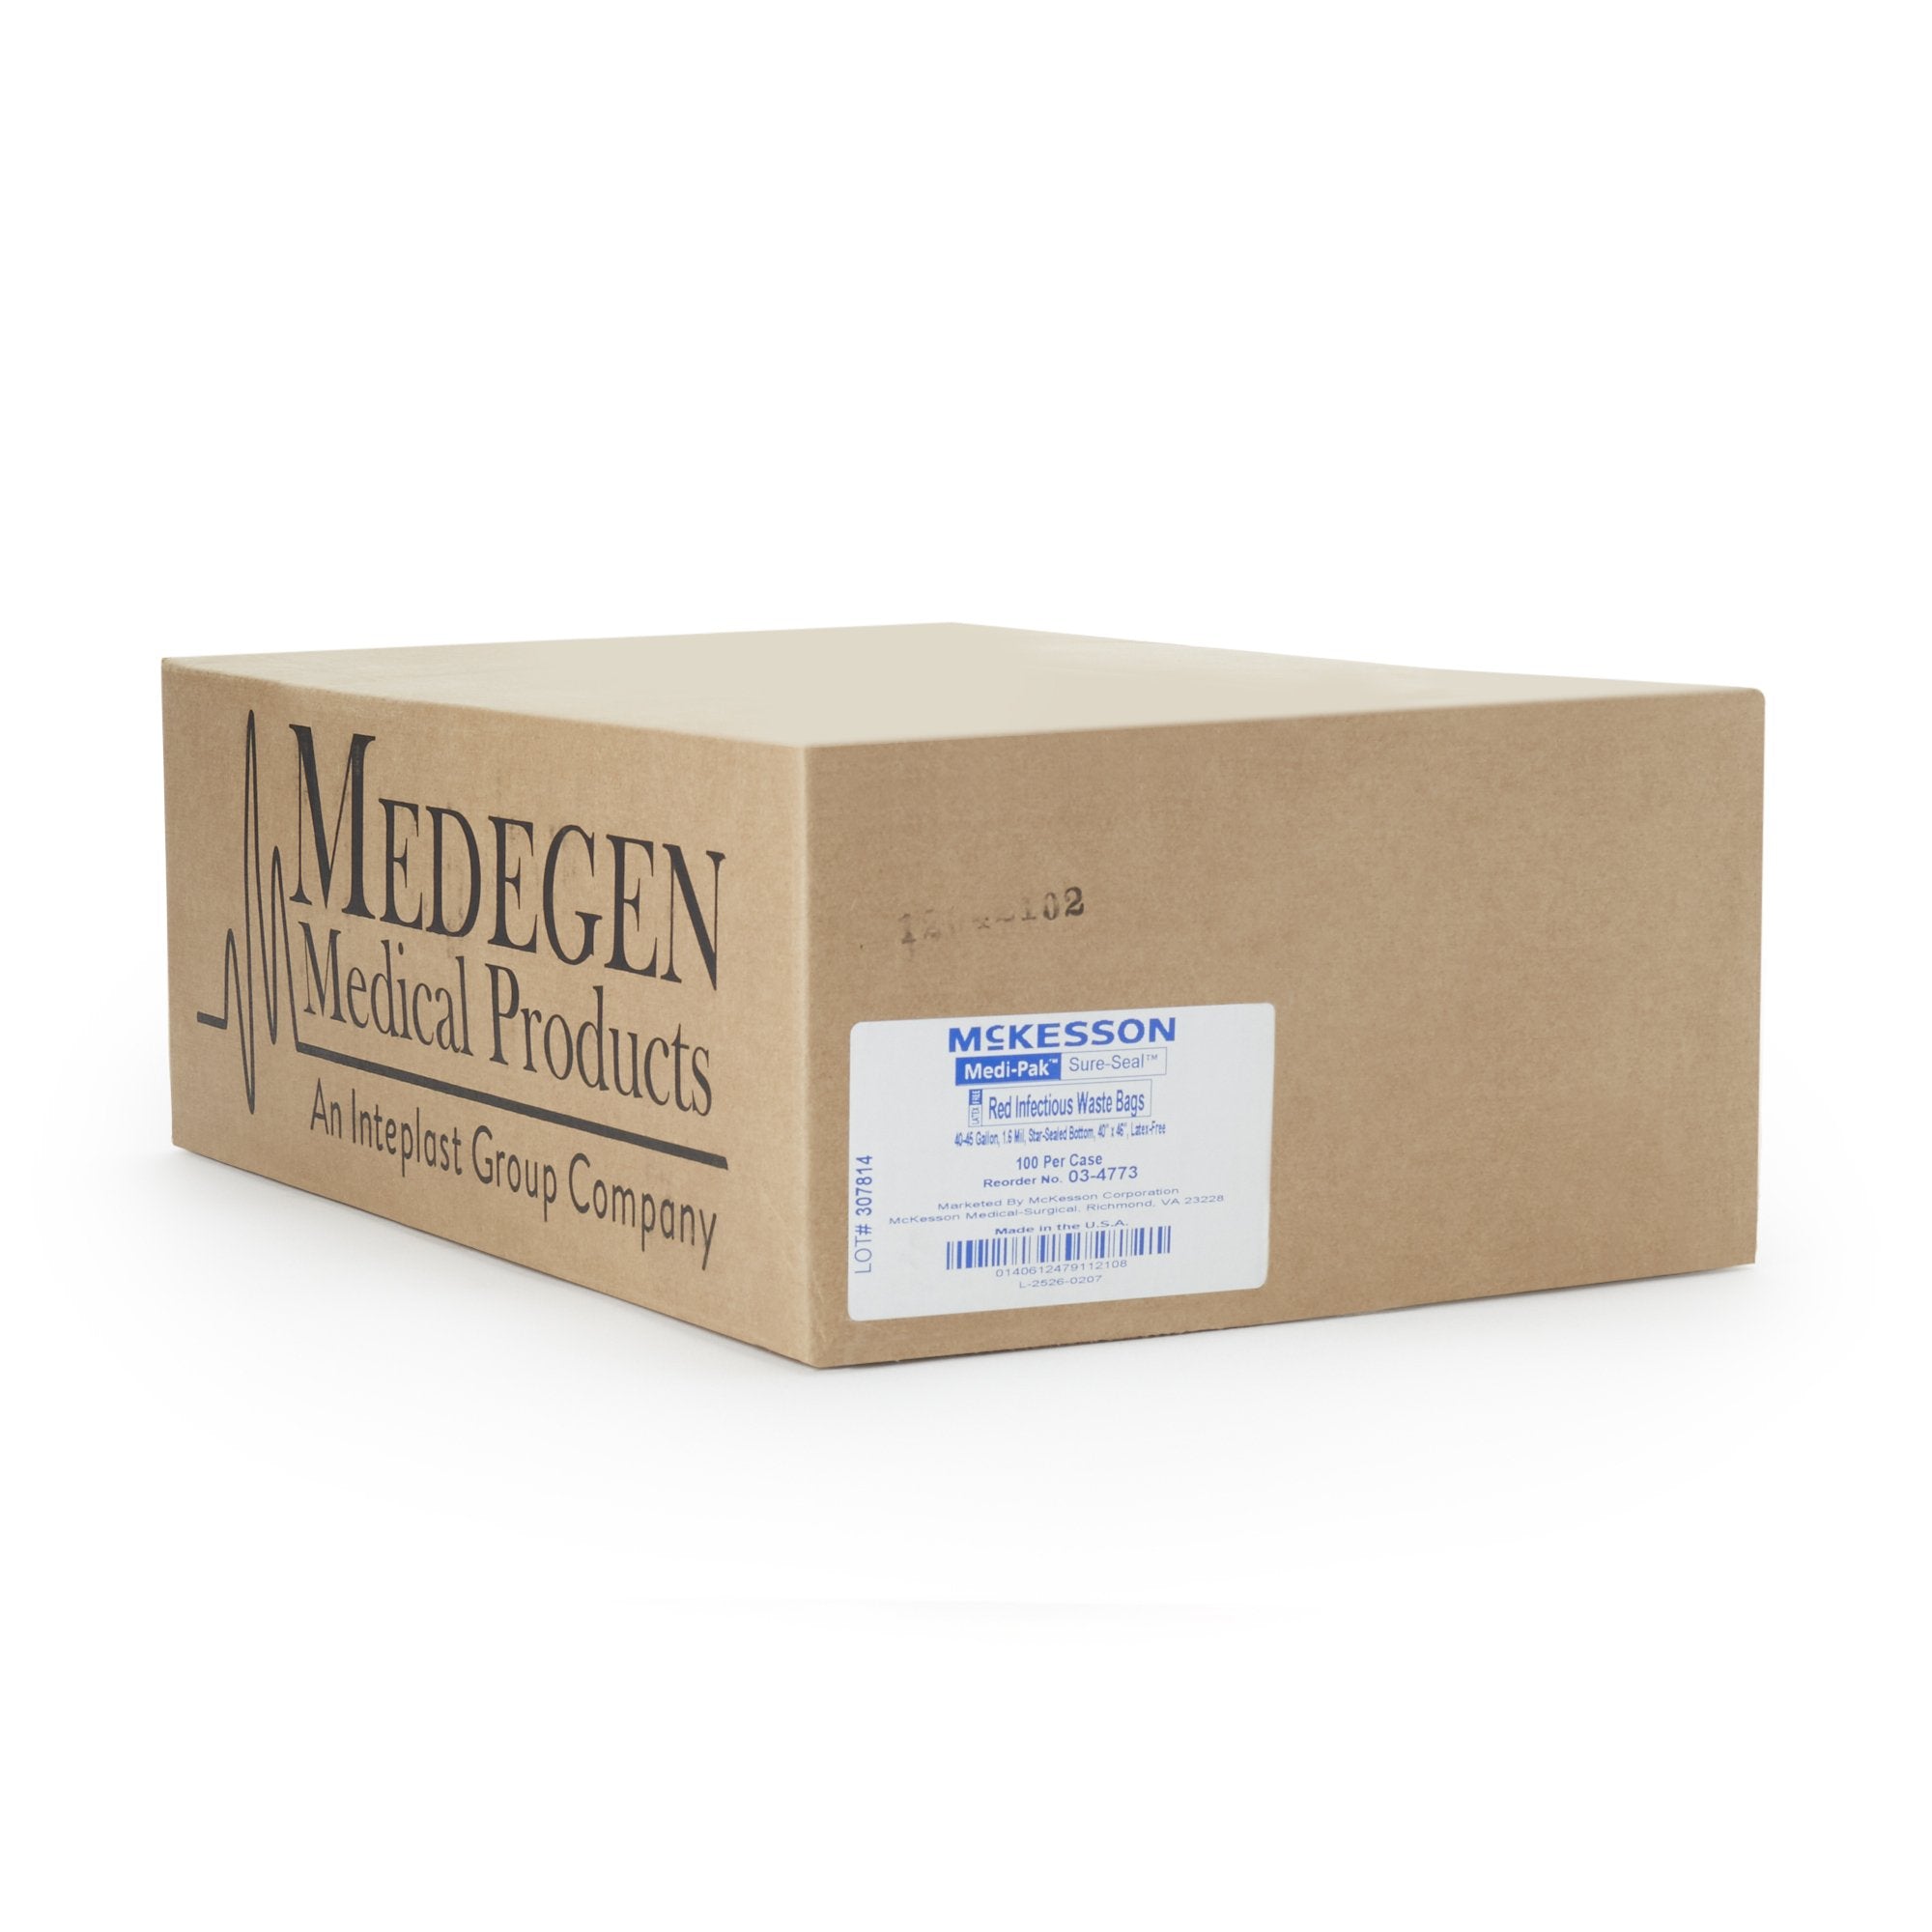 Infectious Waste Bag McKesson 40 to 45 gal. Red Bag LLDPE 40 X 46 Inch